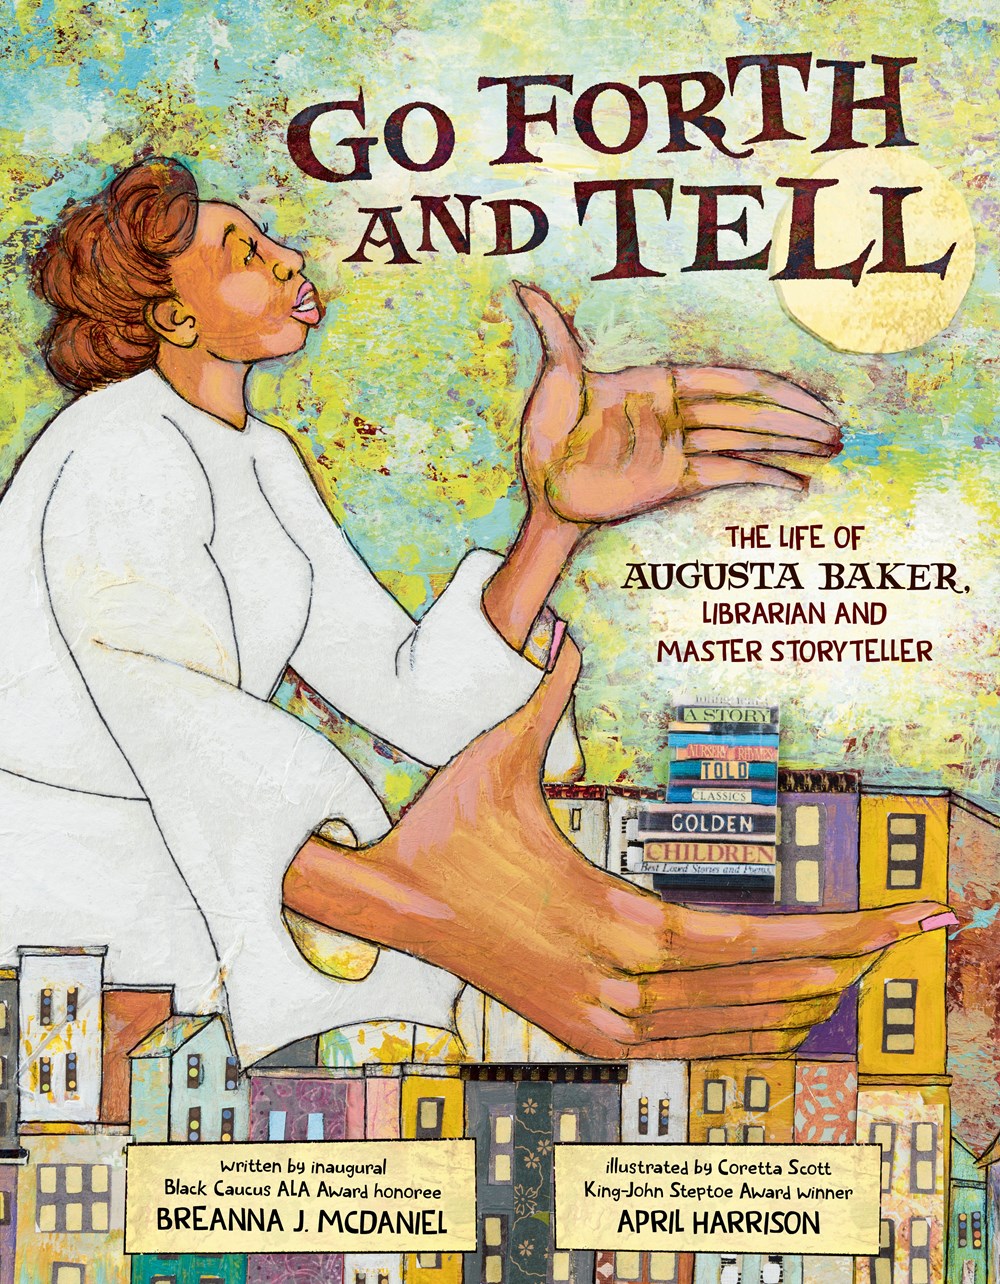 Go Forth and Tell: The Life of Augusta Baker, Librarian and Master Storyteller by Breanna J. McDaniel, illustrated by April Harrison